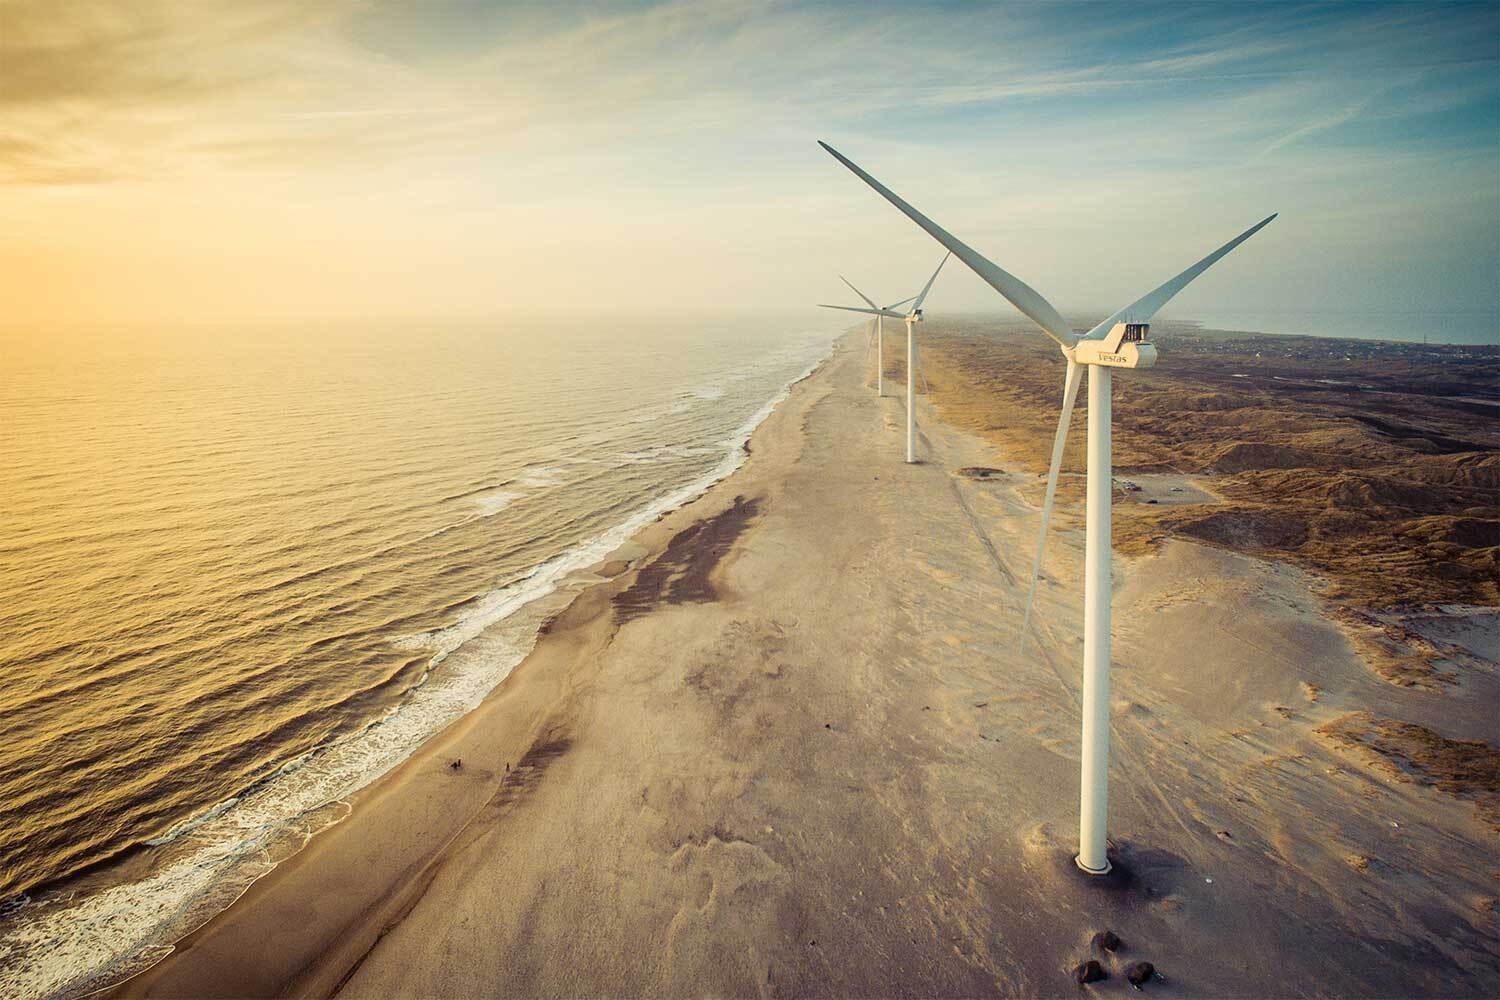 Wind Energy: How Does It Work And Could It Power My Home? – Forbes Advisor  UK